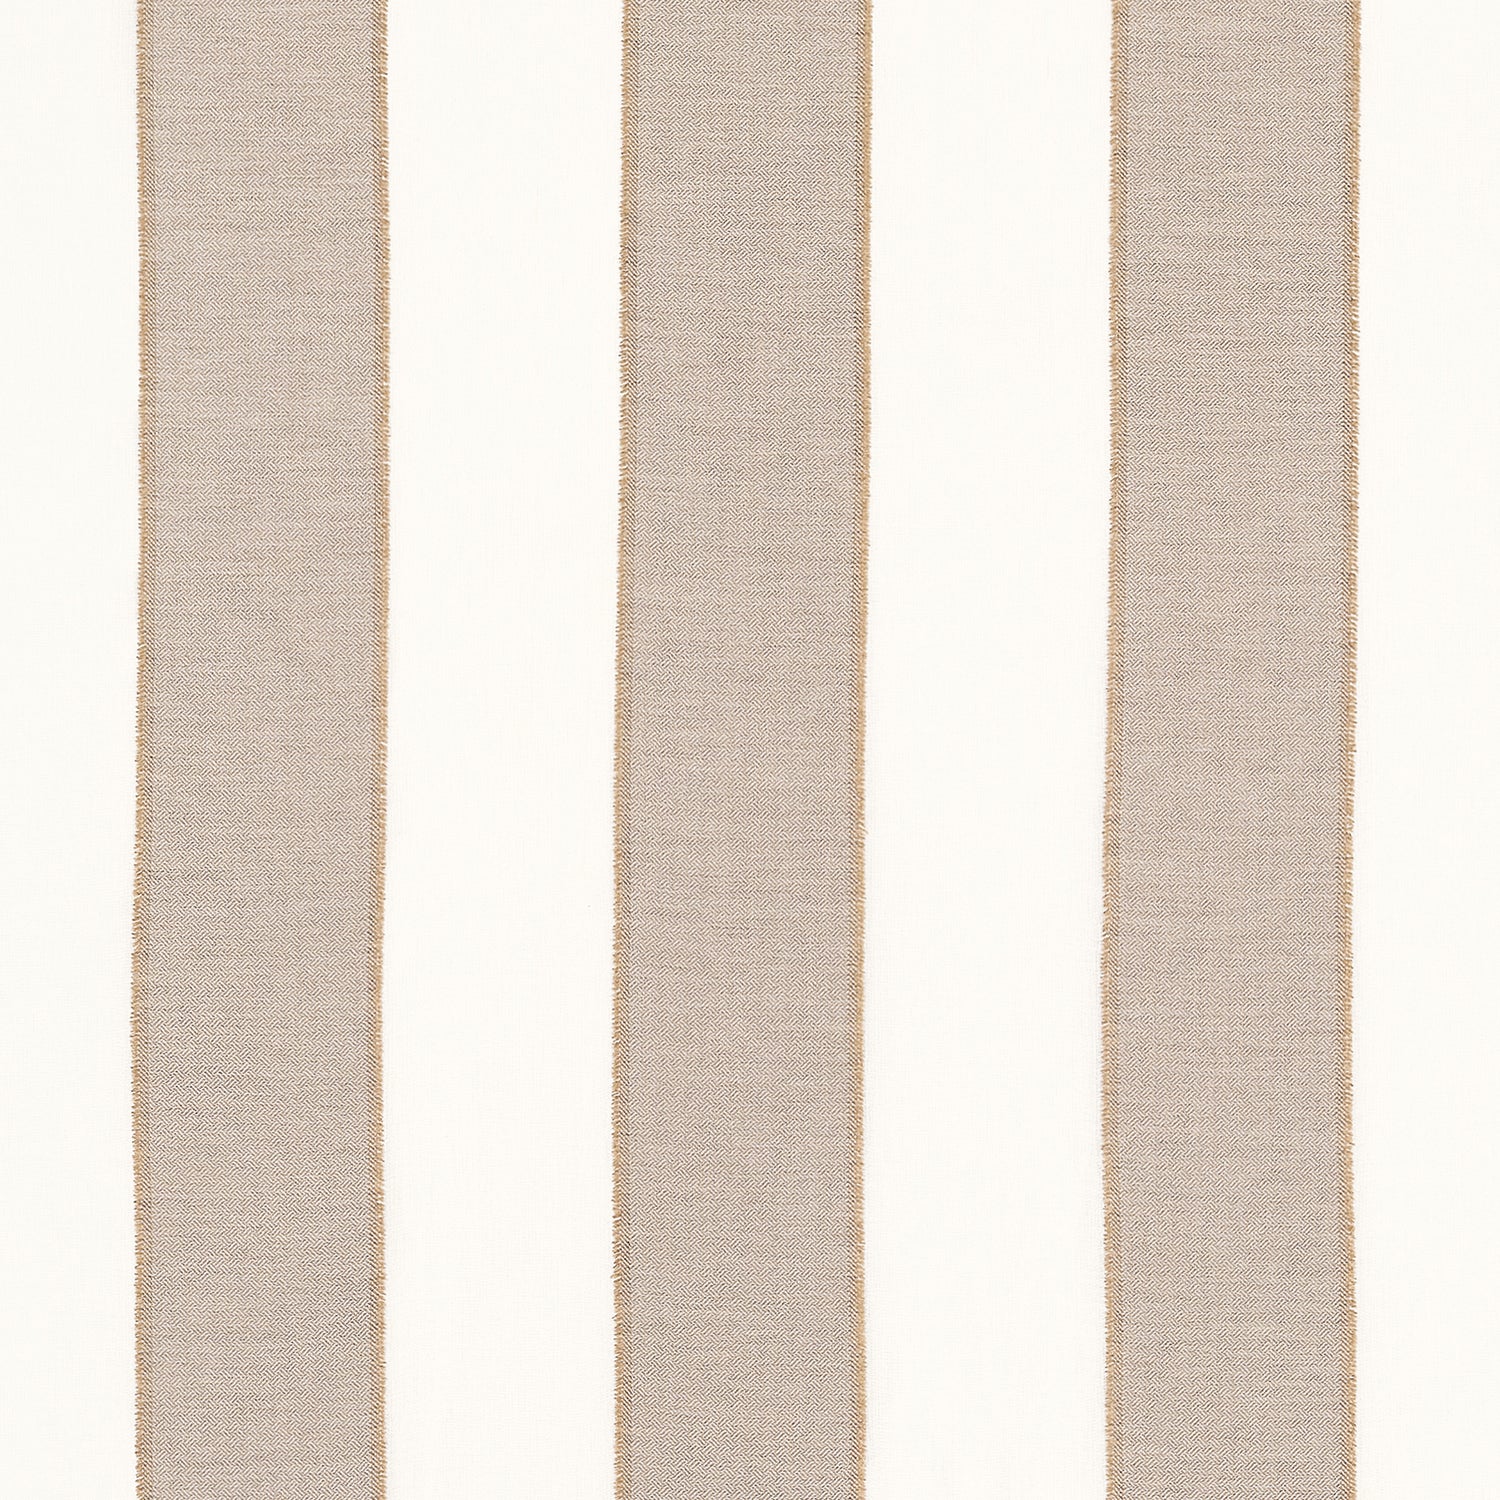 Intaglio Stripe fabric in fawn color - pattern number FWW81742 - by Thibaut in the Locale Wide Width collection